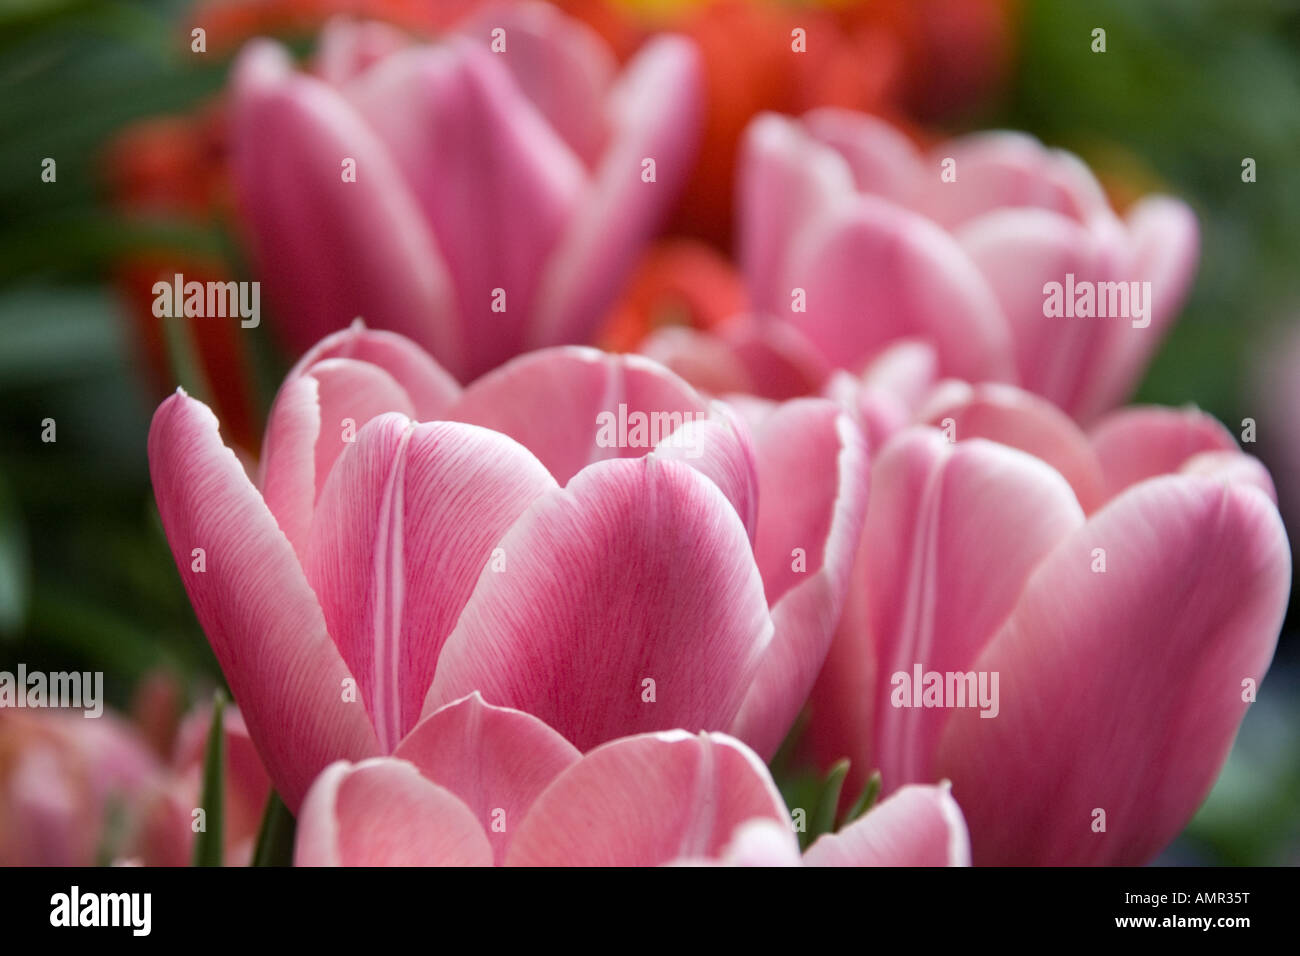 Closeup of group of large perfect pink tulips in peak bloom Stock Photo